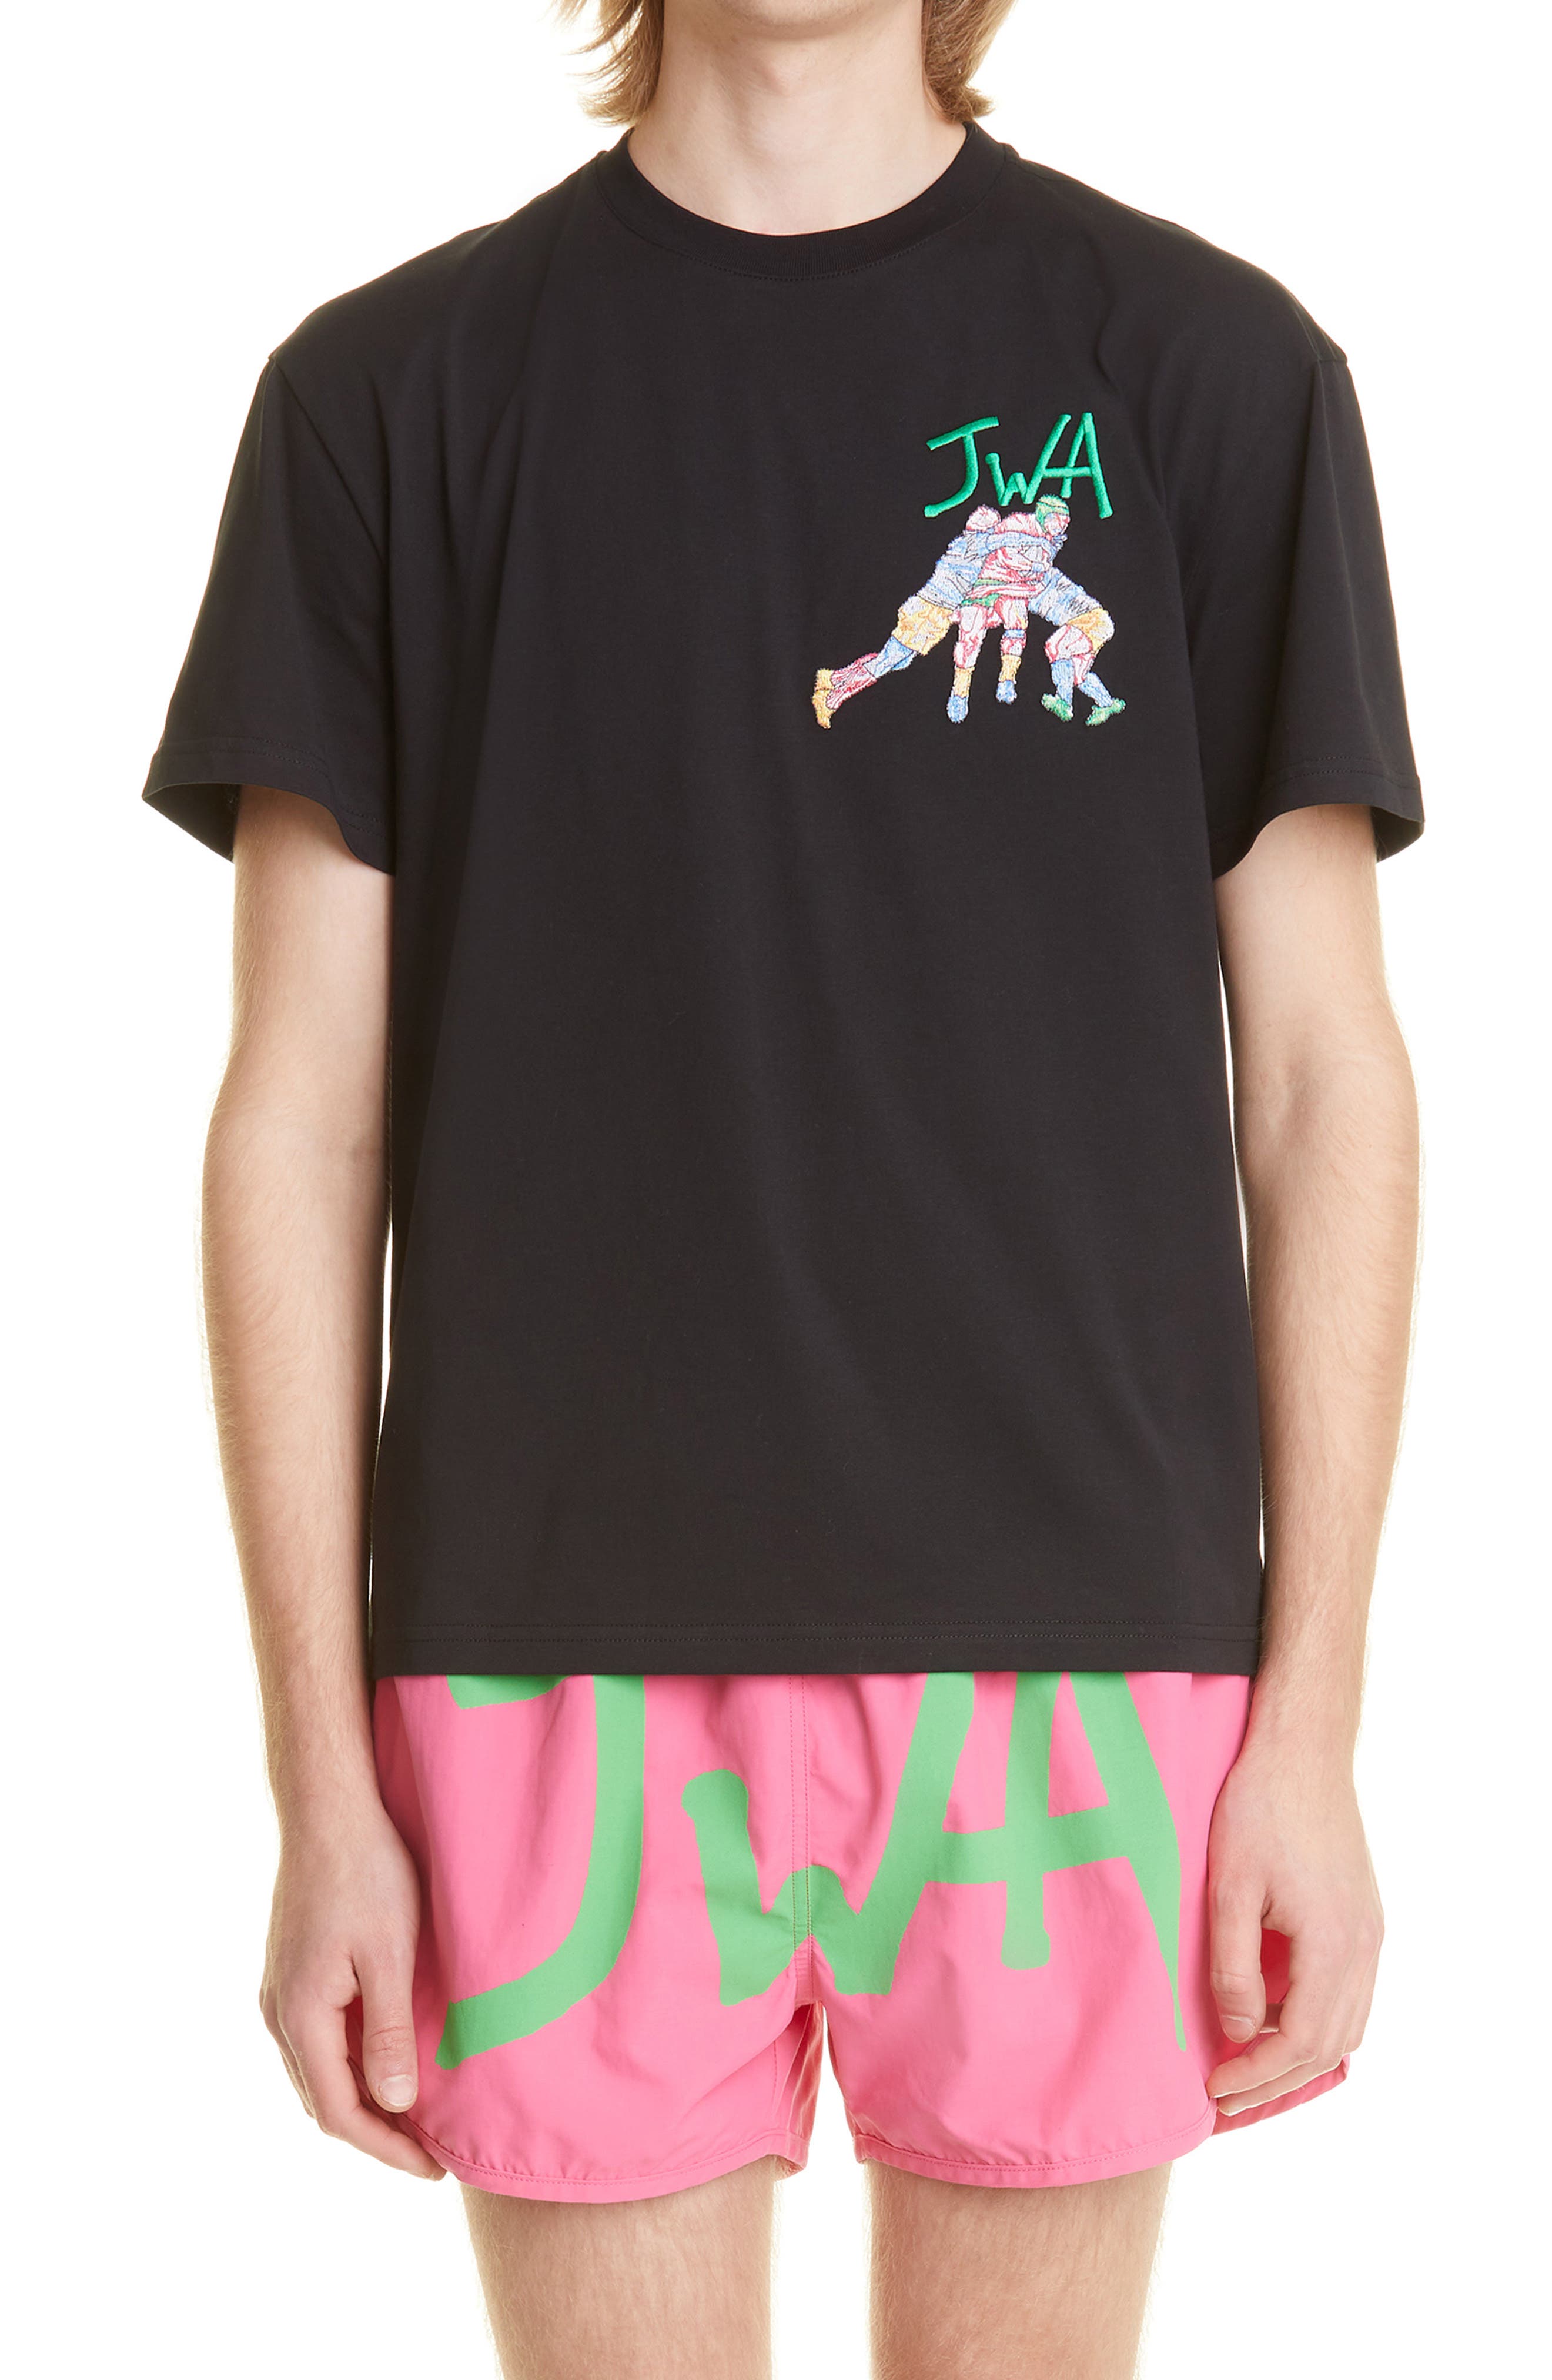 JW Anderson Embroidered Rugby Team Graphic Tee in Black at Nordstrom, Size Medium